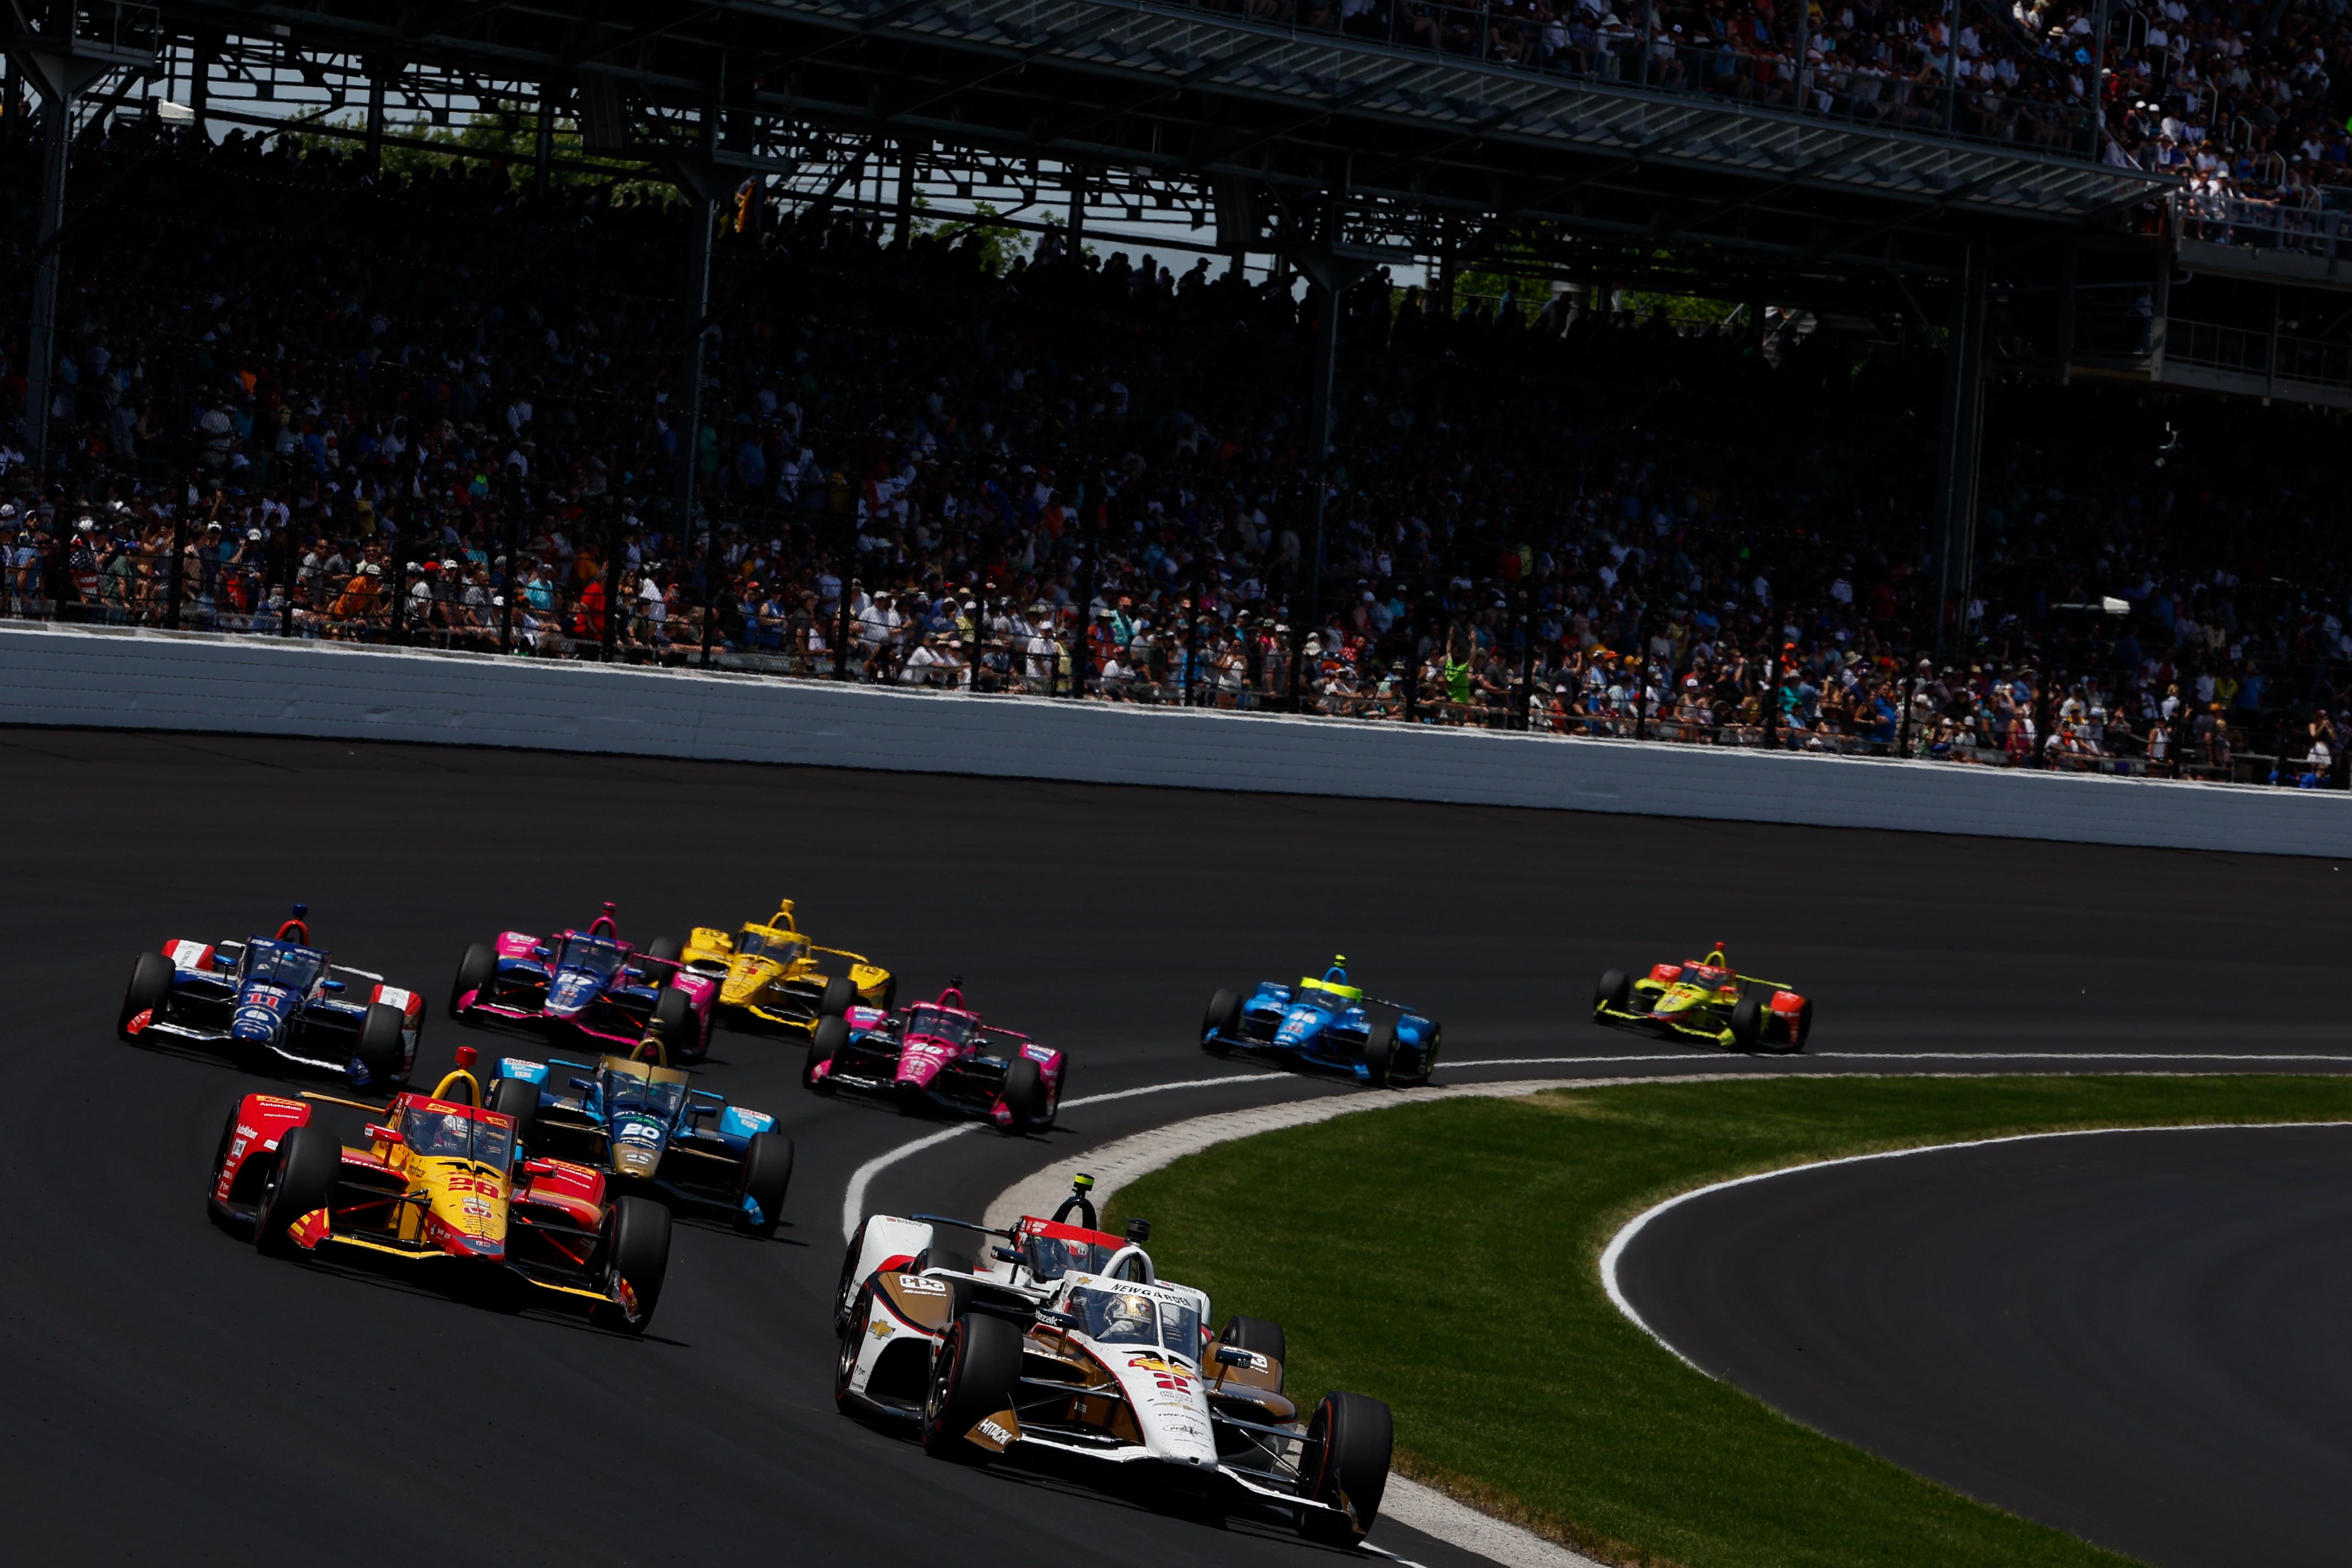 106th Running Of The Indianapolis 500 Presented By Gainbridge Sunday May 29 2022 Largeimagewithoutwatermark M60295